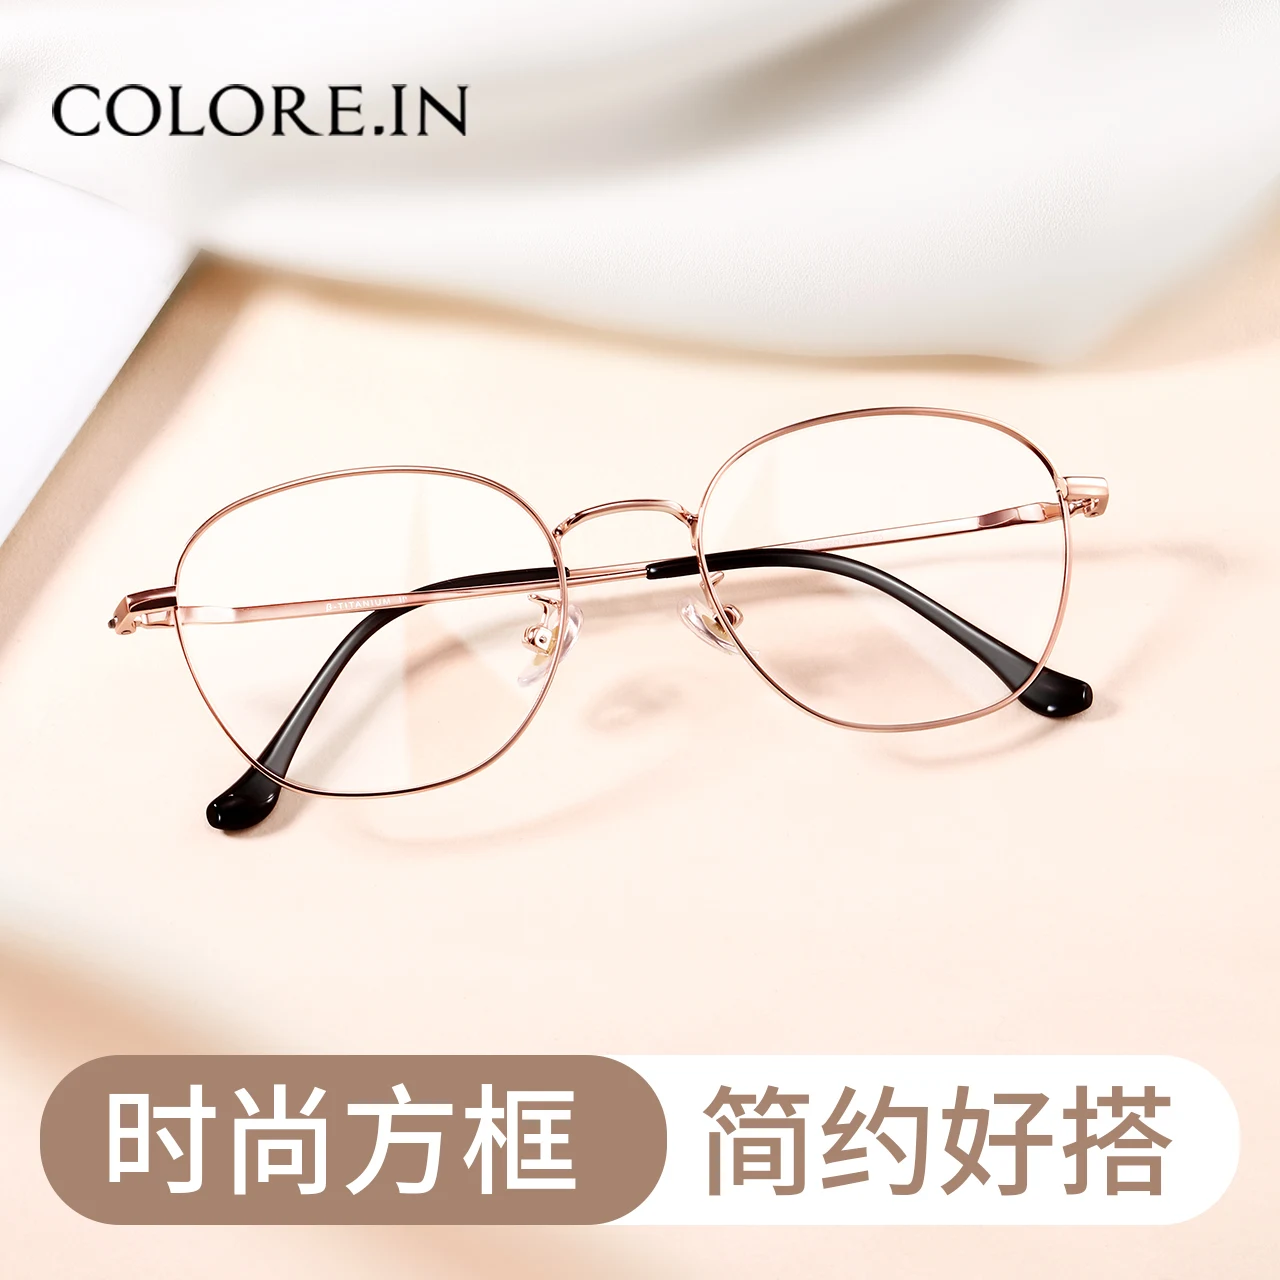 Pure Titanium Myopia Glasses Ultra-Light round Face Can Be Equipped with Degrees Eyeglass Frame Glasses Frame for Men